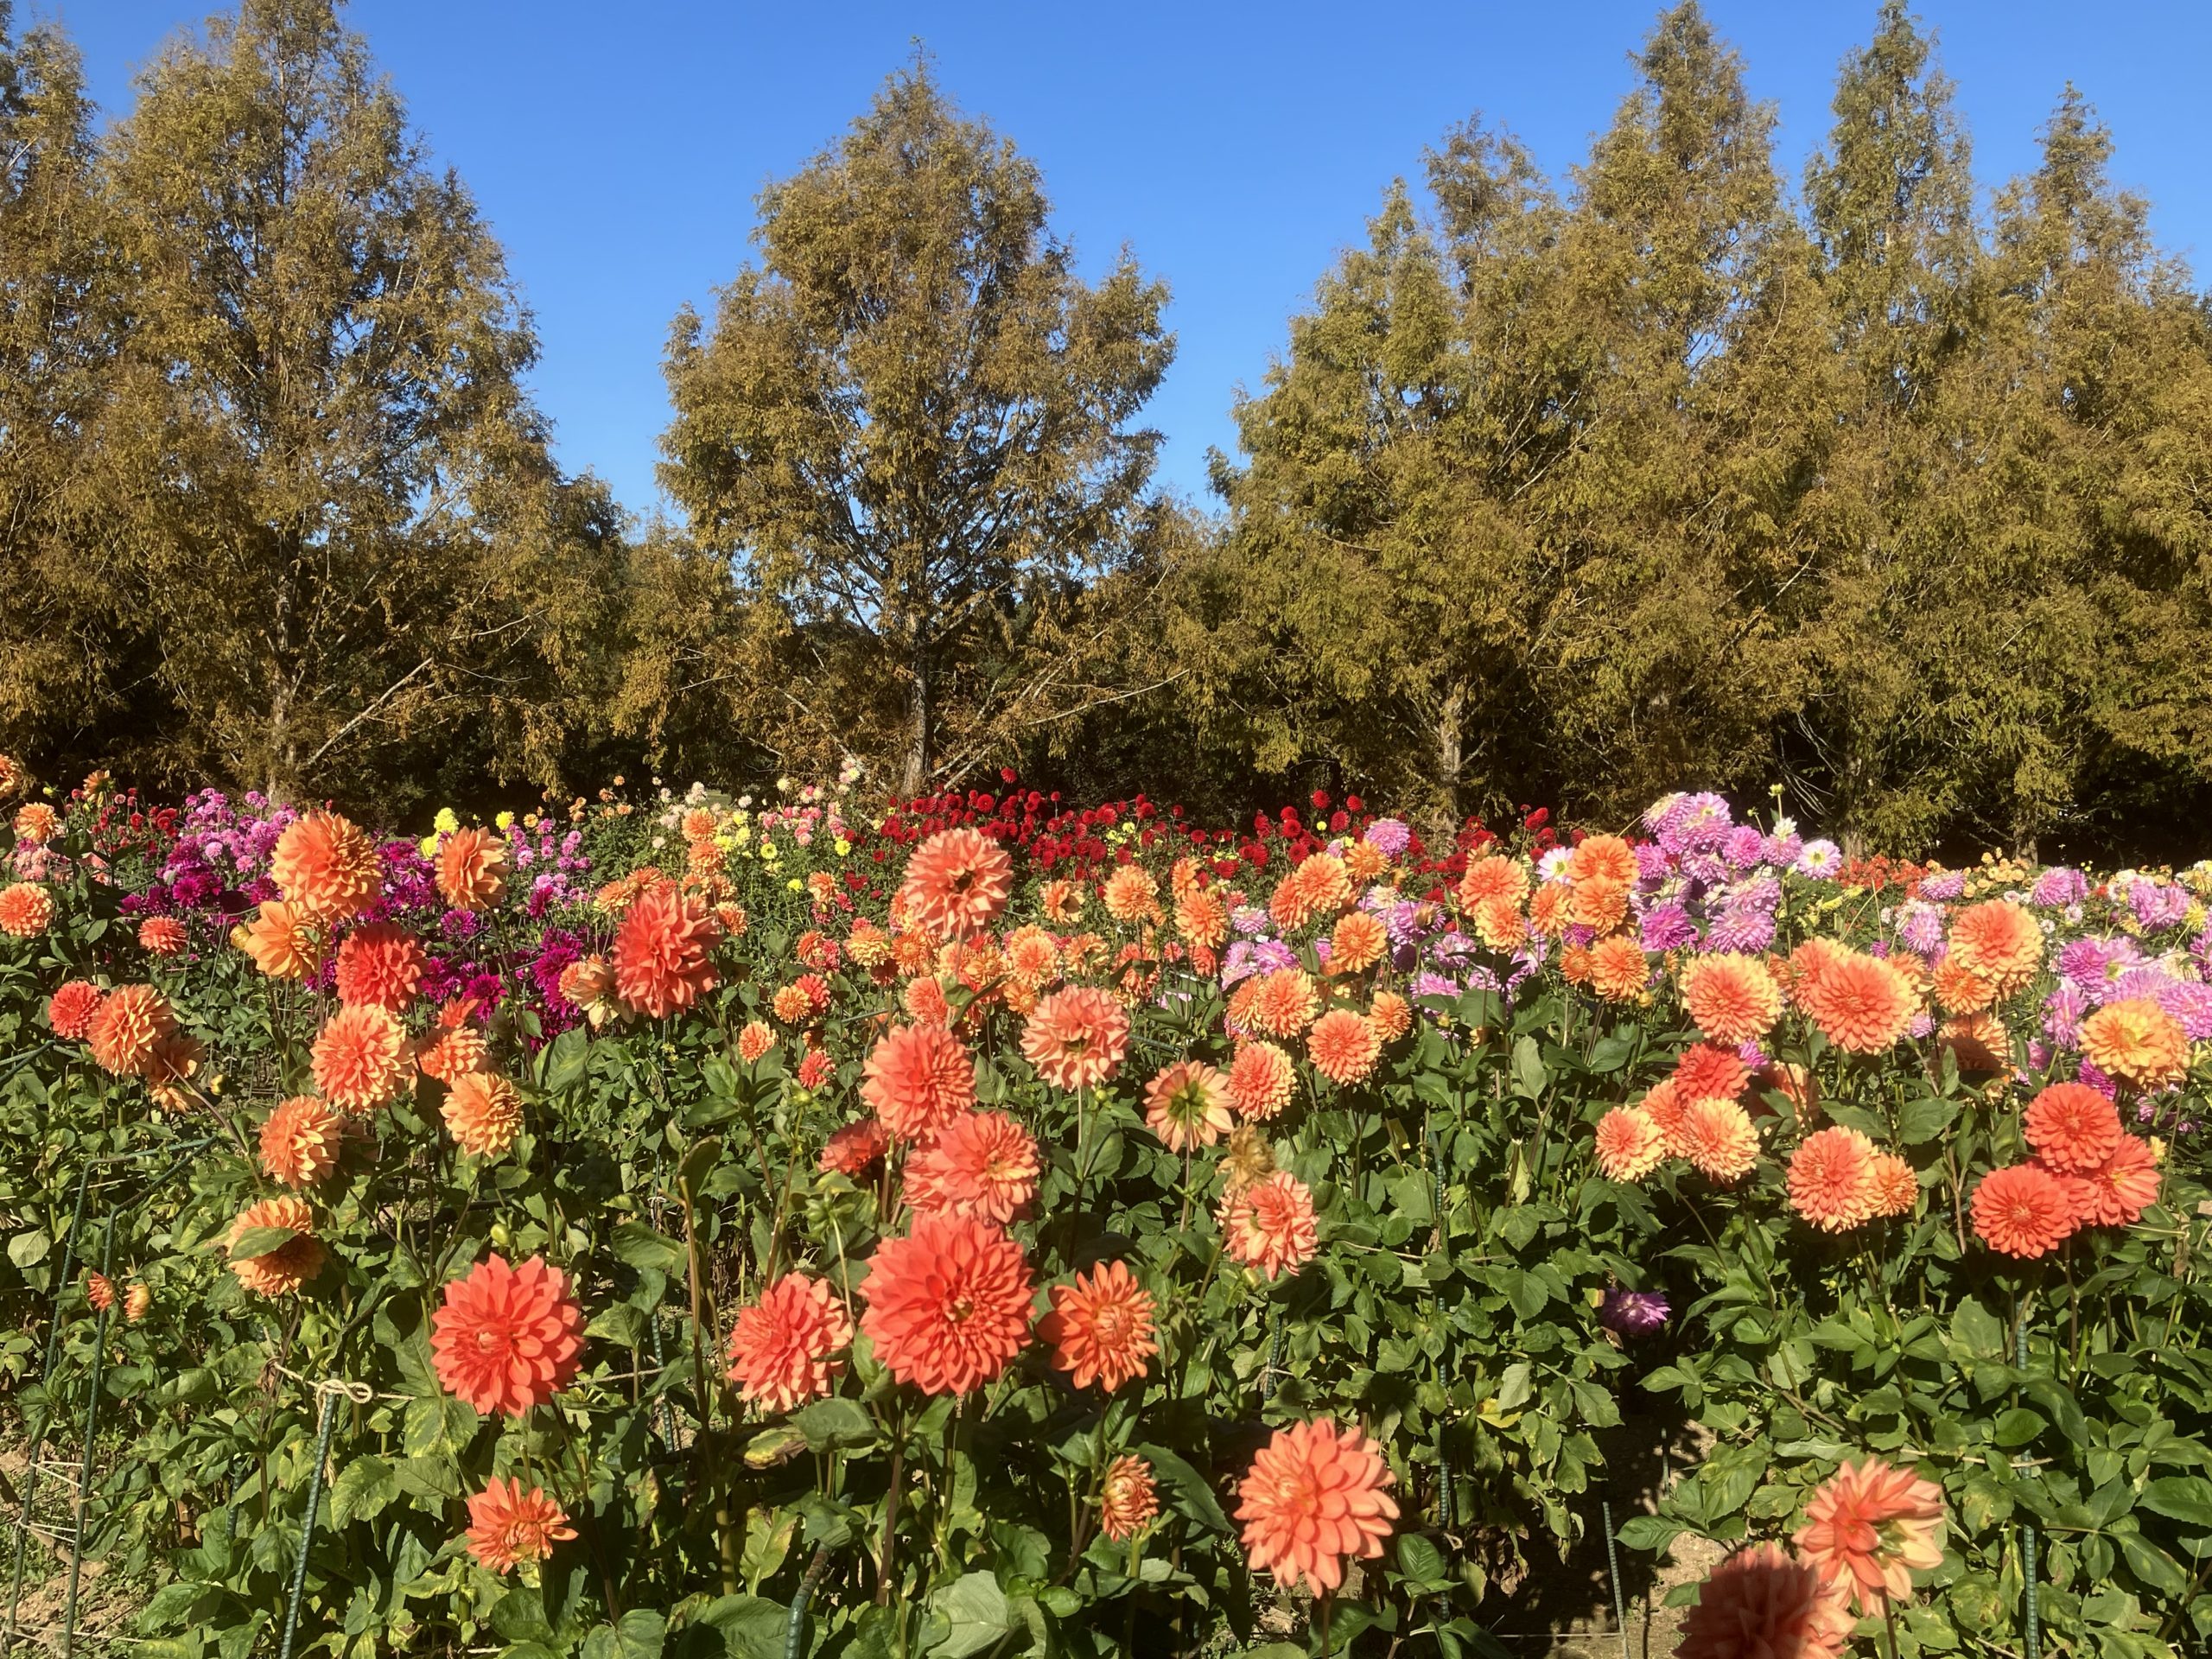 【Park open】Dahlia 【The best season for viewing flowers】Garden Mom 【Closed】Cosmos【The best season for viewing flowers】